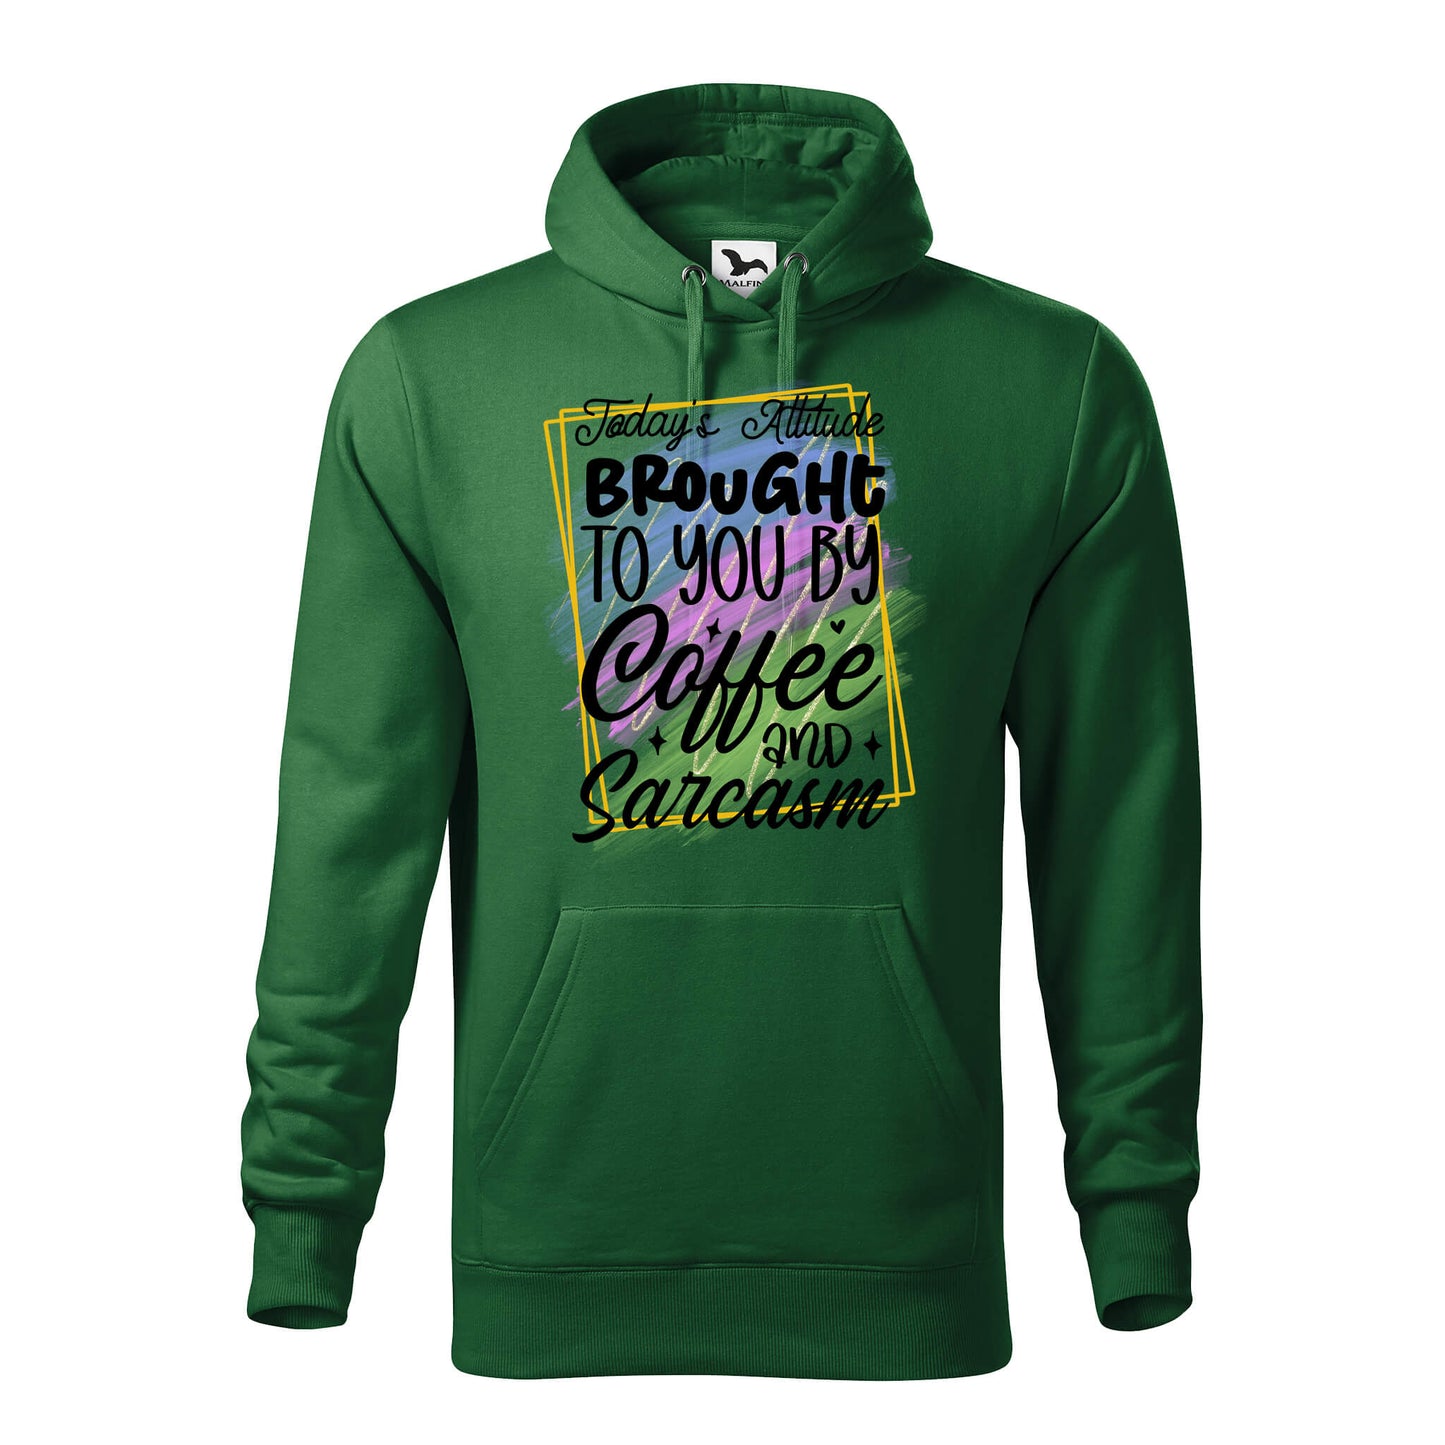 Todays attitude brought to you by hoodie - rvdesignprint